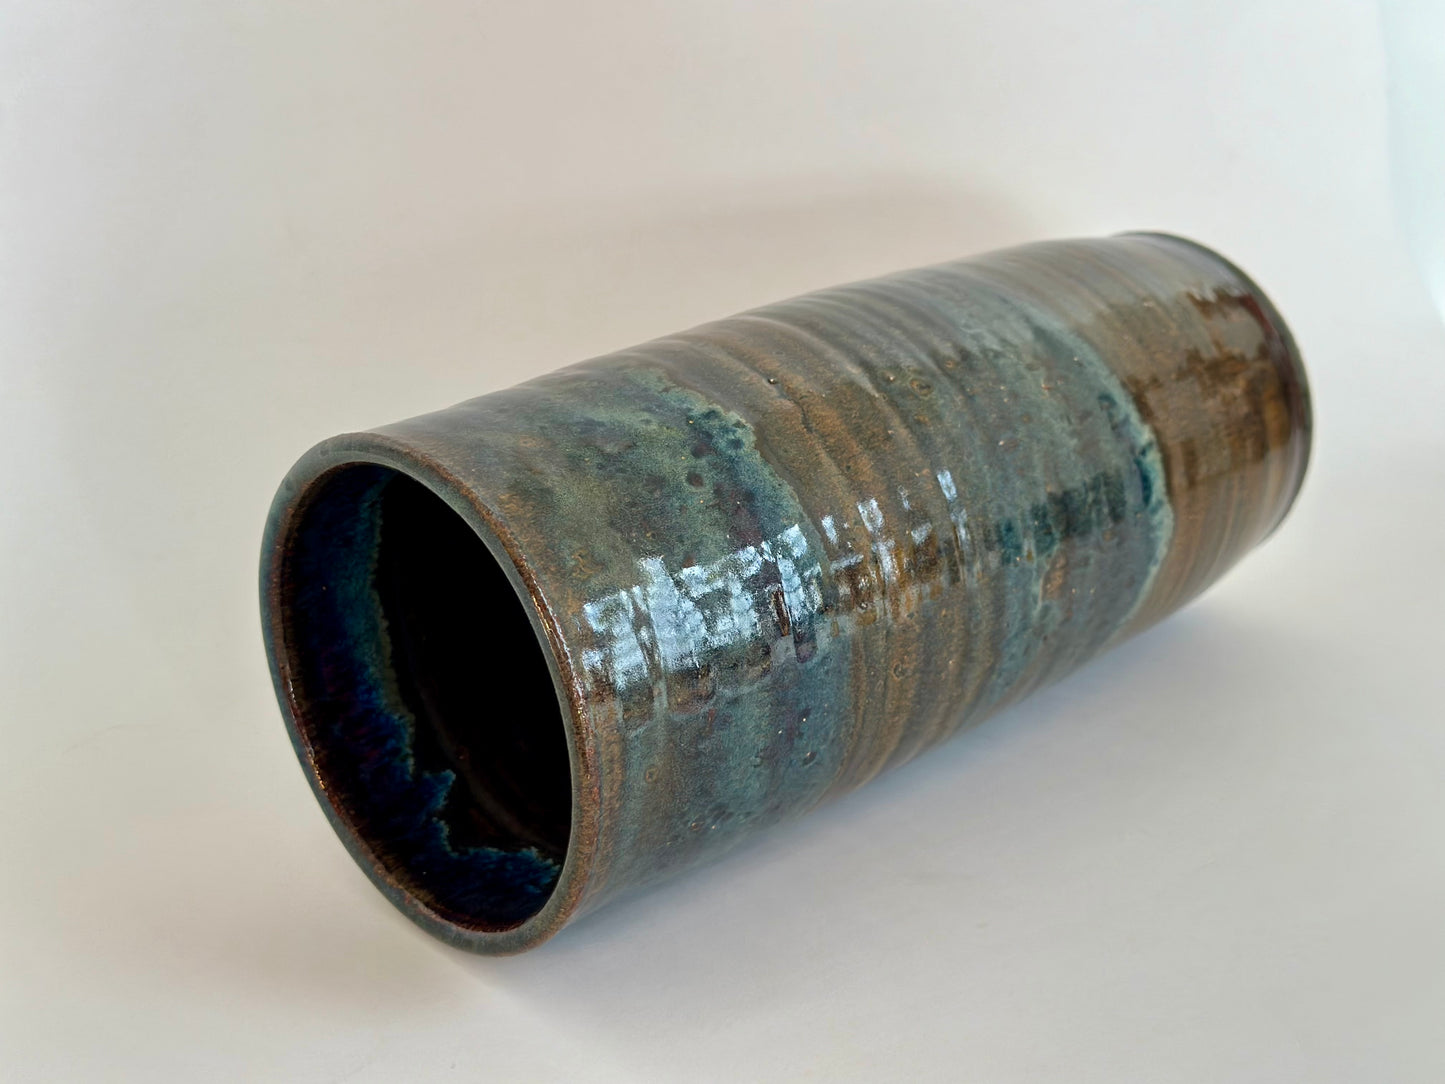 Blue & Brown Cylindrical Vase | Pottery by Mike